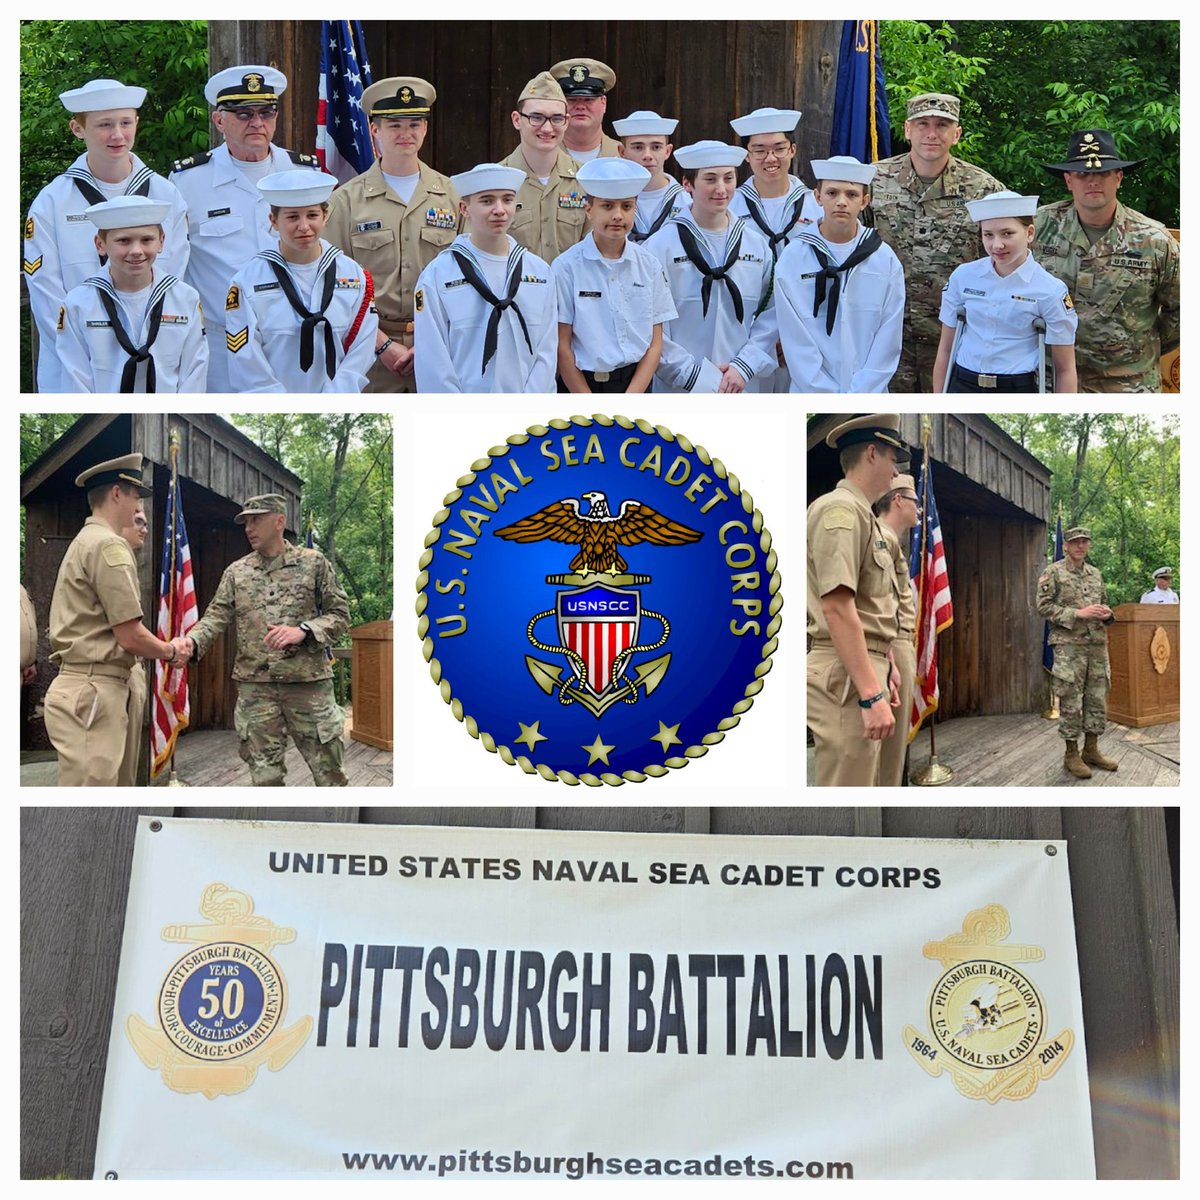 I had the honor of participating in the Pittsburgh Naval @seacadets graduation and summer picnic.  I was a Pittsburgh Cadet 1997 to 2002 and absolutely love seeing this program live on. 2 graduates, one going @ArmyROTC  and one going NROTC. I am excited to see where they go.